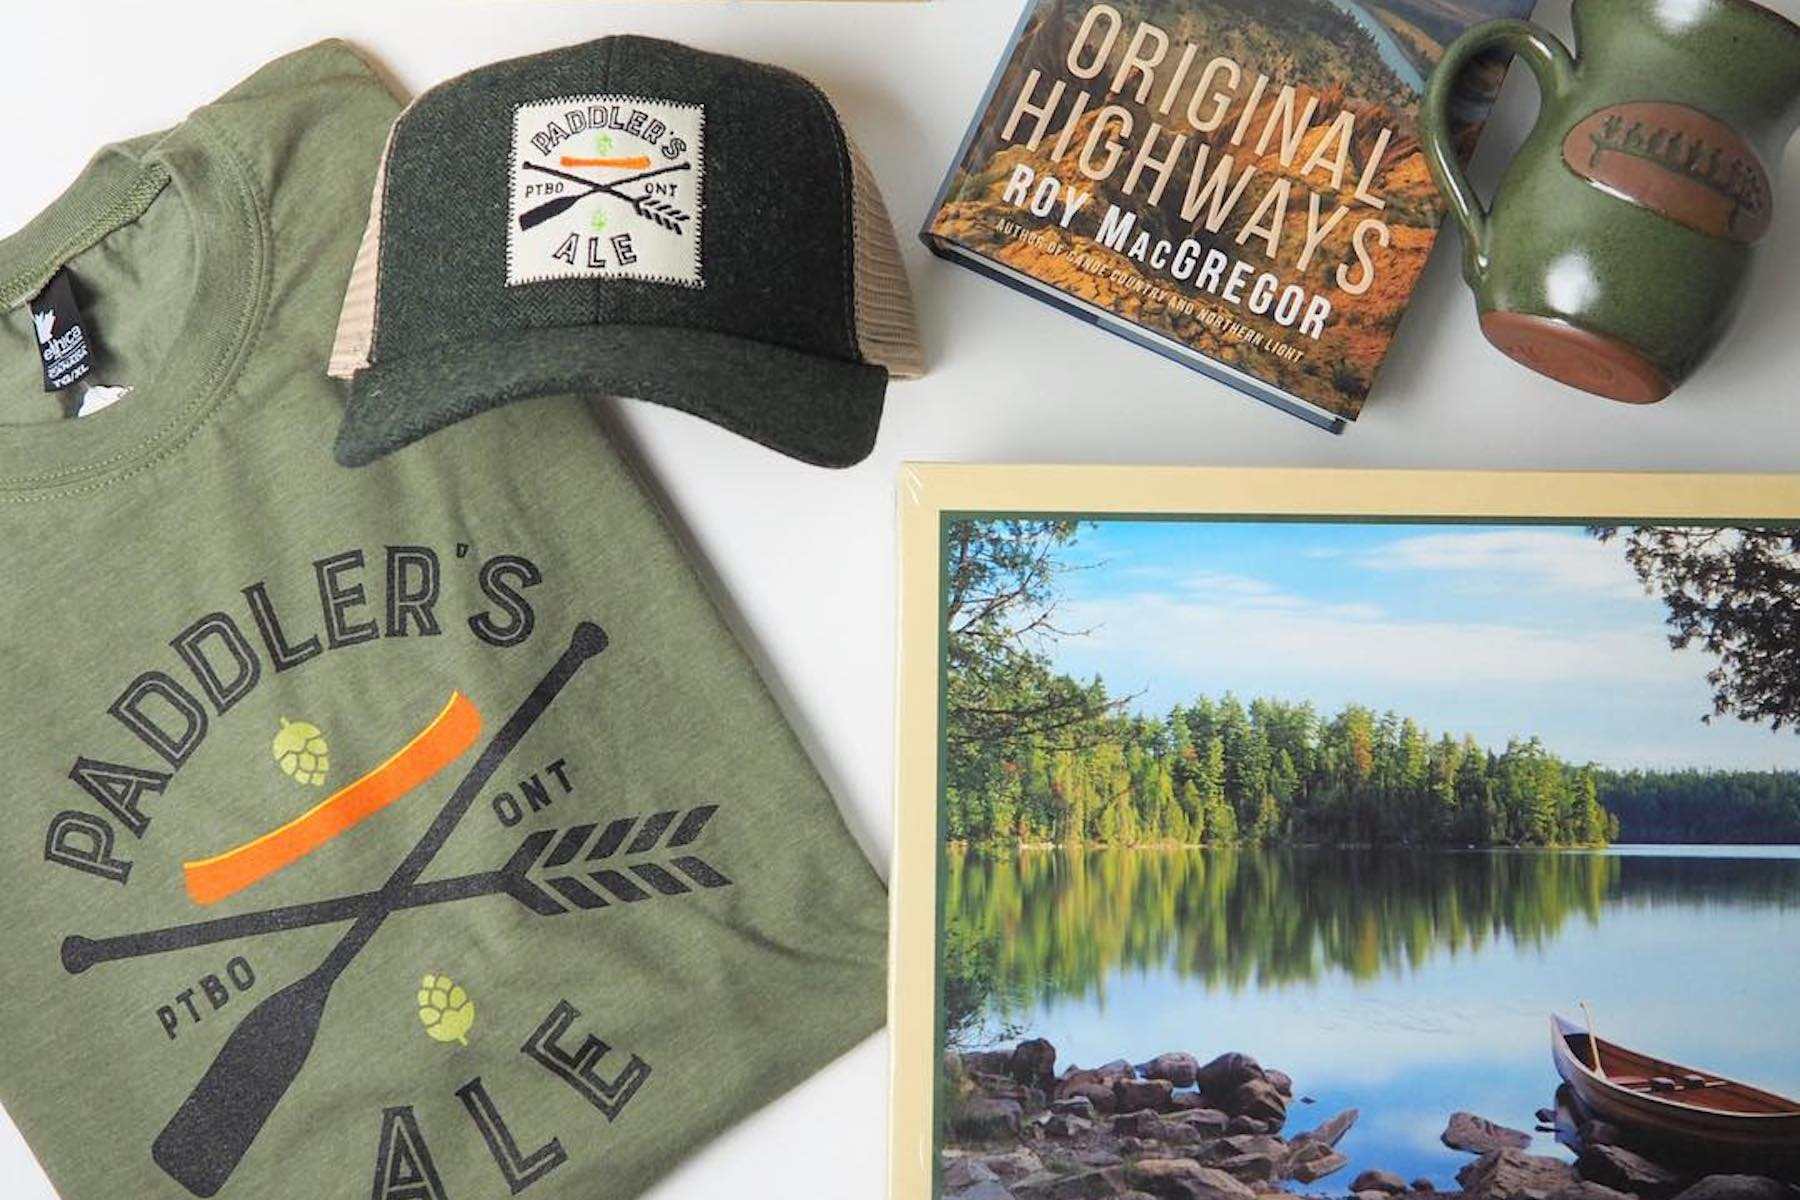 A green Paddler's Ale t-shirt and baseball hat, a wooden canoe paddle rack, Original Highways by Roy McGregor, a ceramic mug with The Canadian Canoe Museum's logo, and a puzzle of a canoe on a lake.